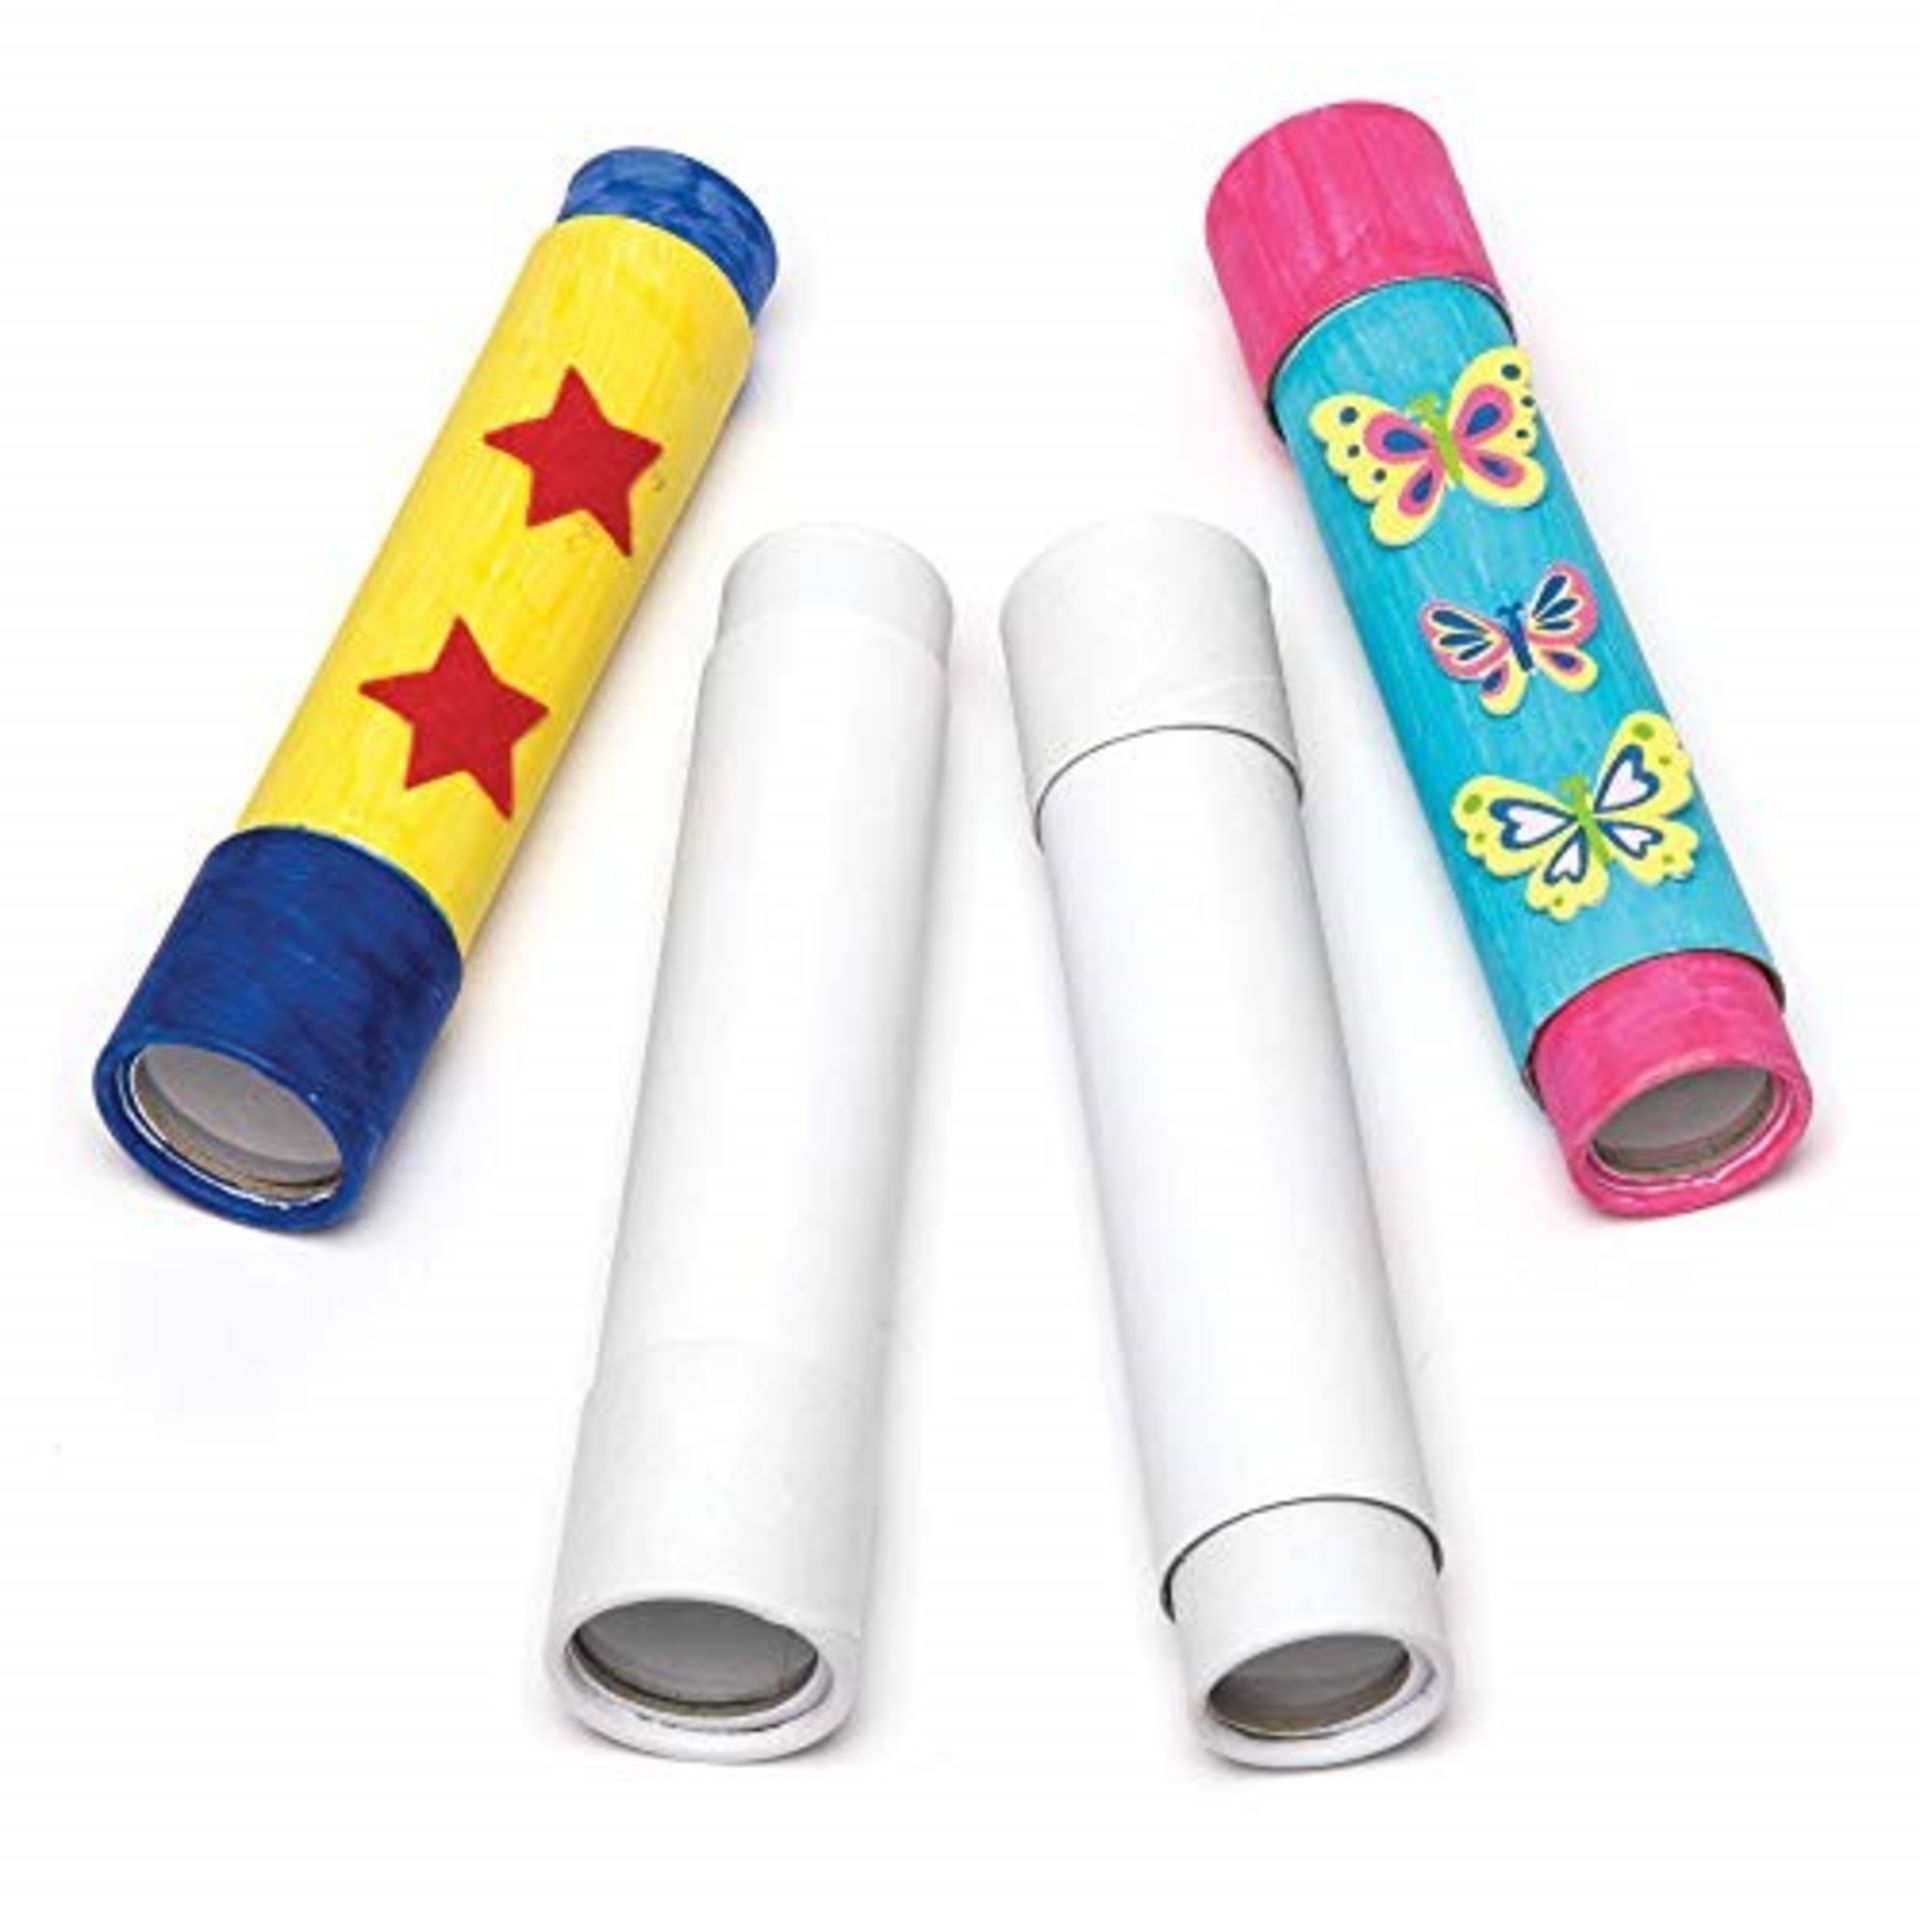 Baker Ross AR403 Design Your Own Telescopes, Blanks for Kids to Paint, Decorate and Pe